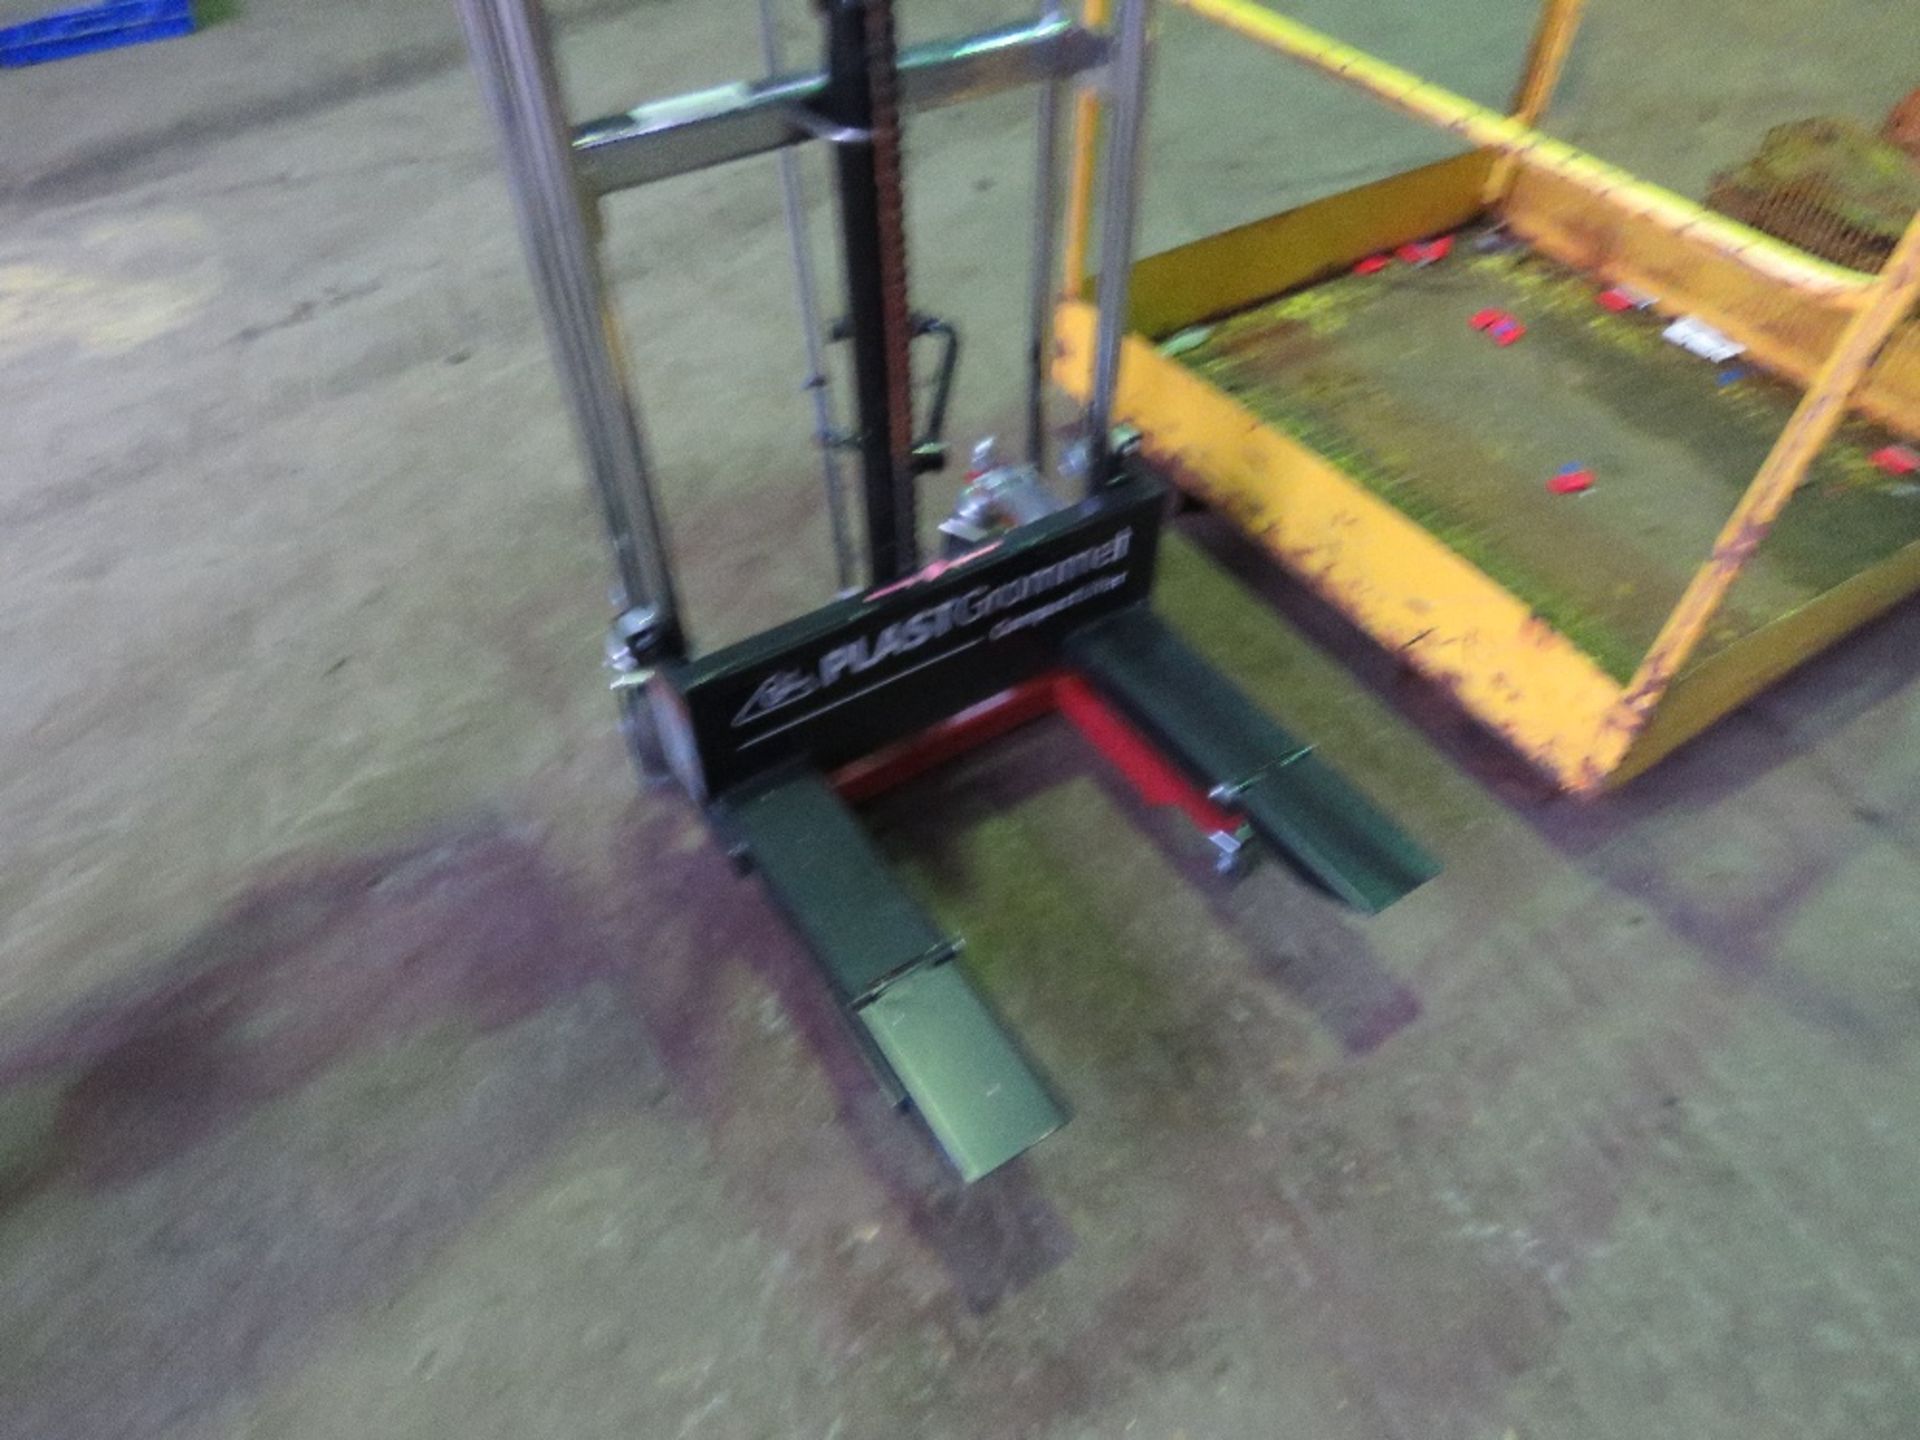 PLAST GROMMET COMPACT HYDRAULIC LIFT TRUCK, APPEARS LITTLE USED, FOOT OPERATED. WHEN TESTED WAS SEEN - Image 2 of 5